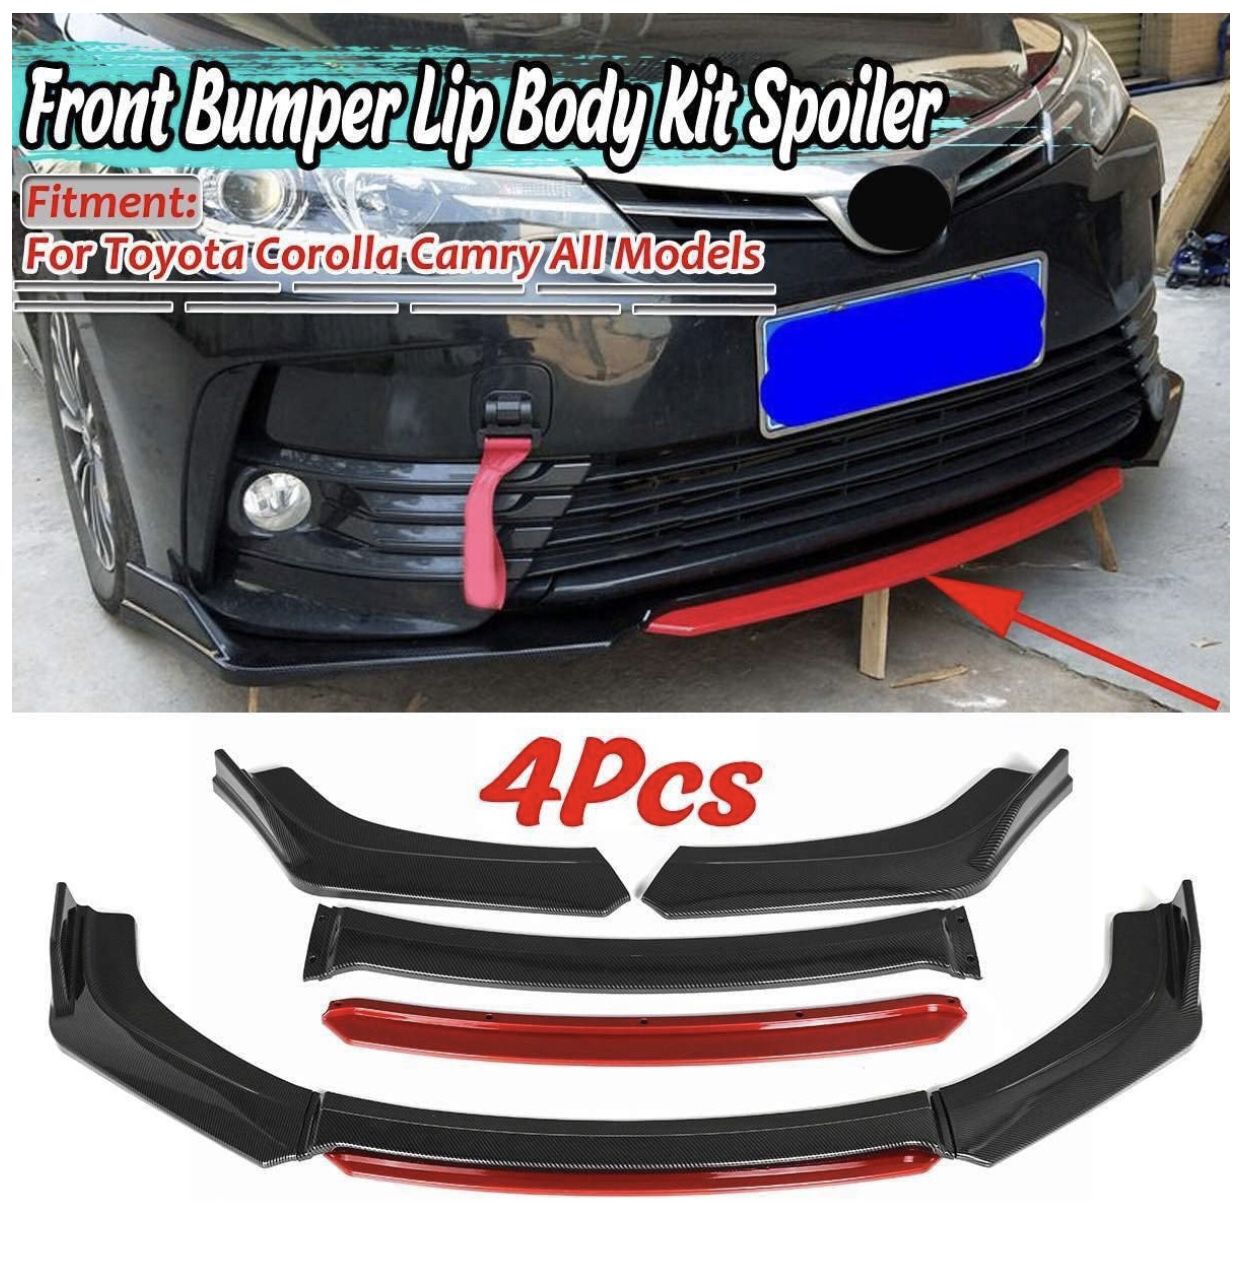 4pc Car Front Bumper Splitter Lip Diffuser Spoiler Fit for VW Fit for Golf MK5 MK6 MK7 Fit for Toyota Corolla Camry Fit for Subaru Fit for Kia (Color